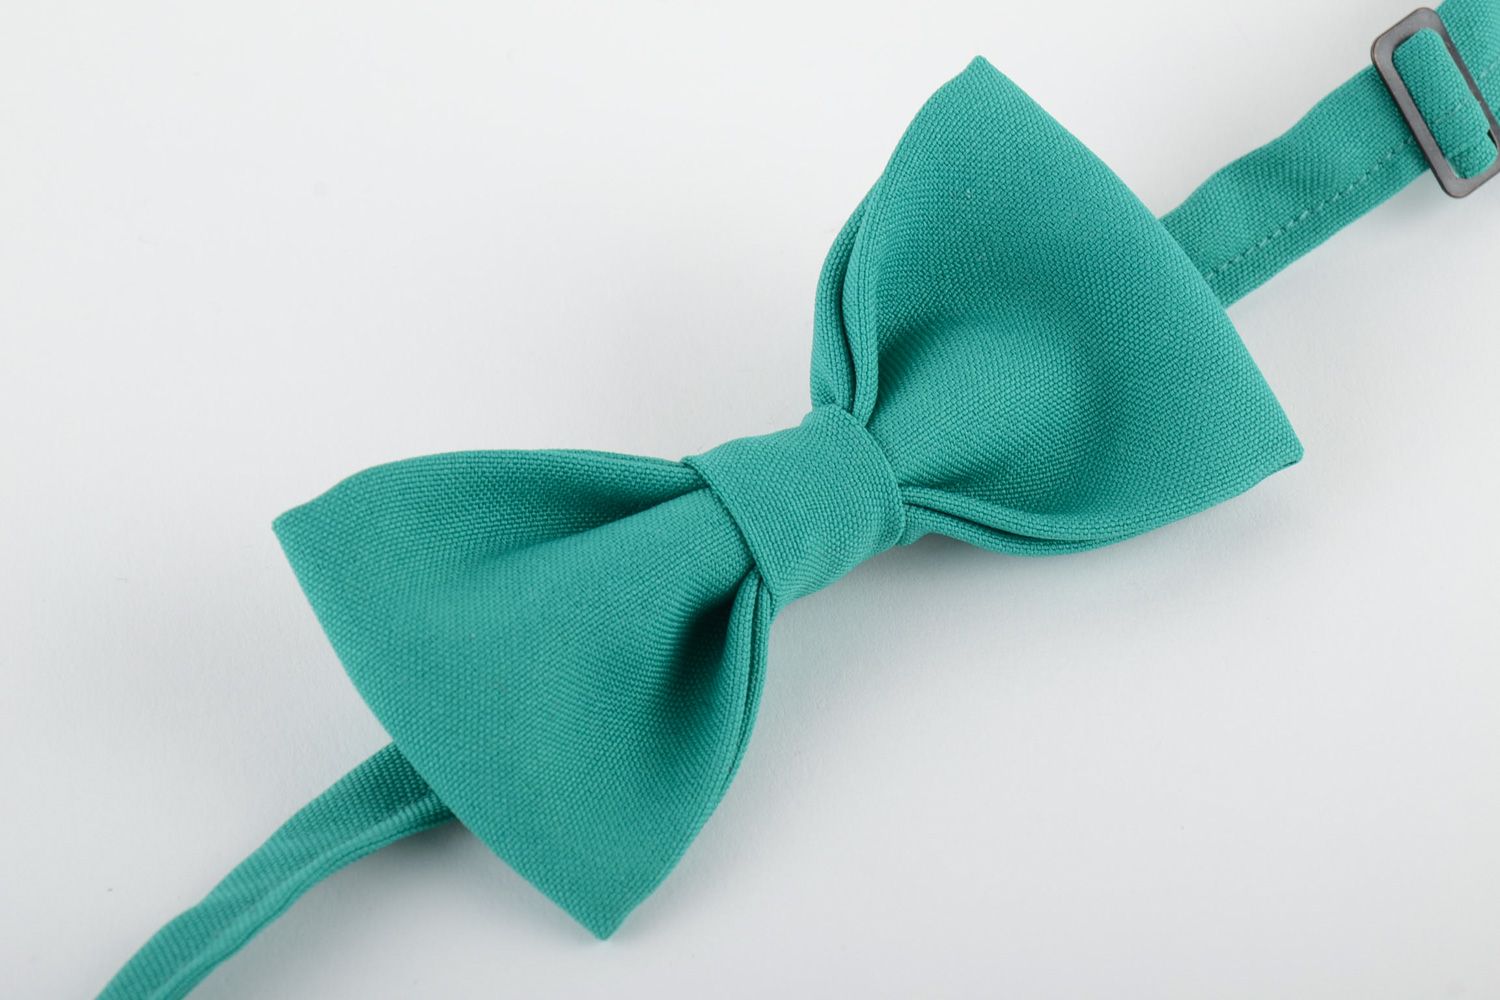 Handmade stylish bow tie sewn of costume fabric of turquoise color for men photo 4